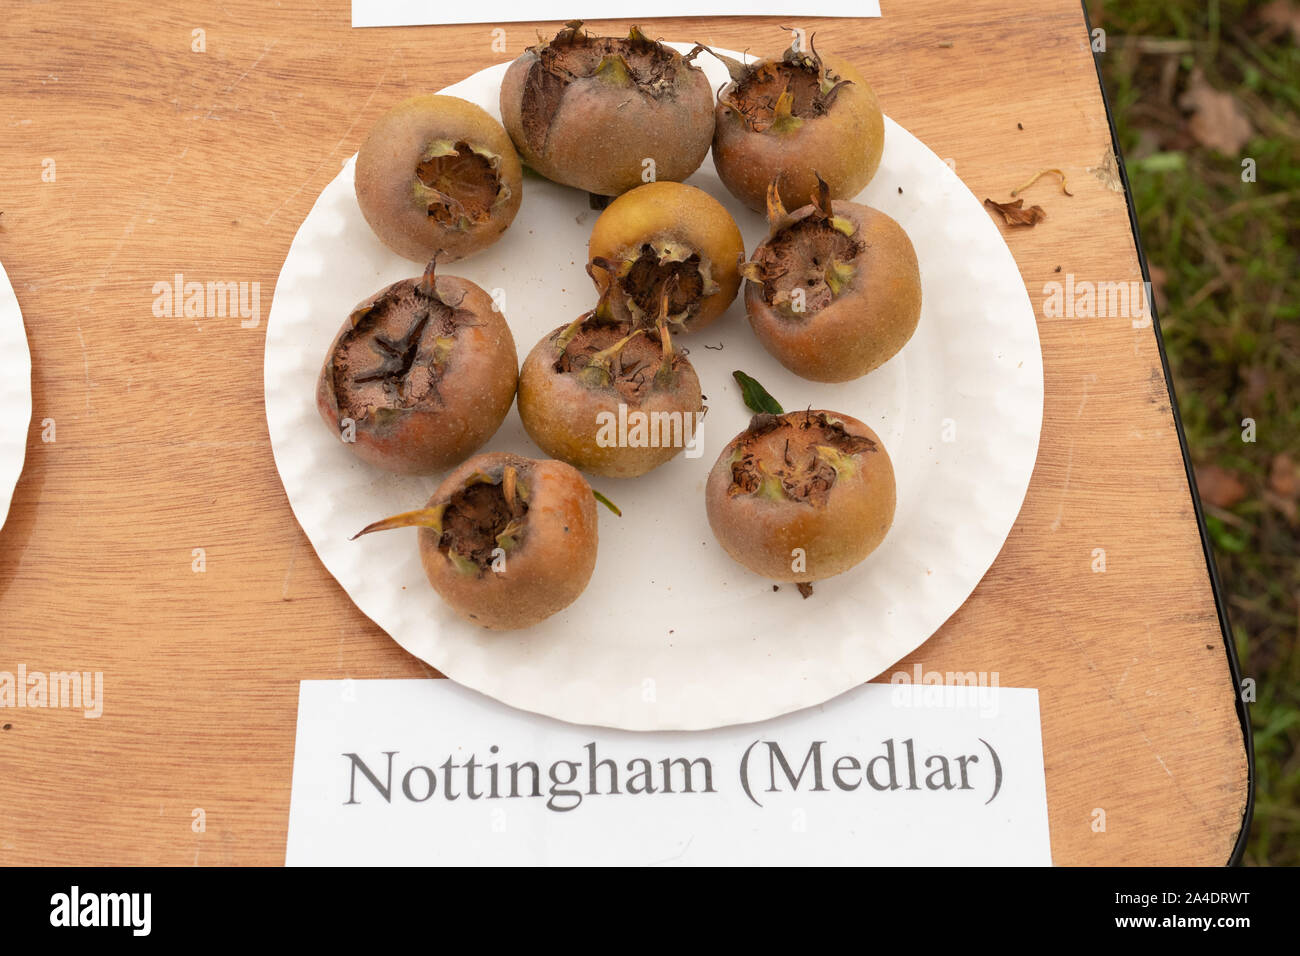 Plate of fruits from a Nottingham medlar (Mespilus germanica) tree Stock Photo